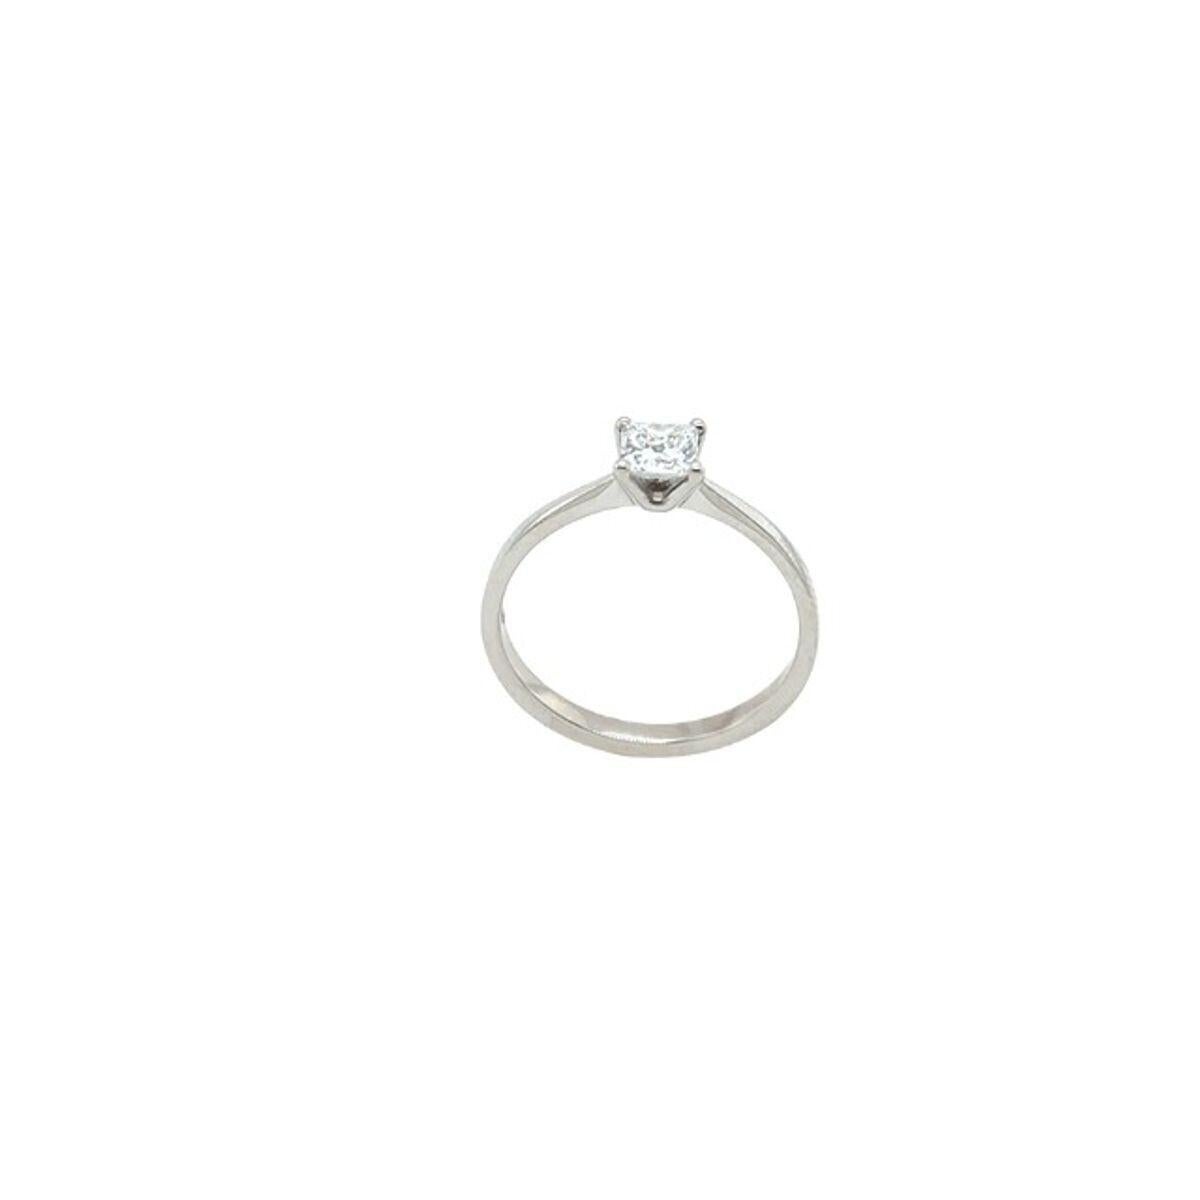 Solitaire 0.40ct F/VVS1 Princess Cut GIA Diamond Ring in 18ct White Gold In Excellent Condition For Sale In London, GB